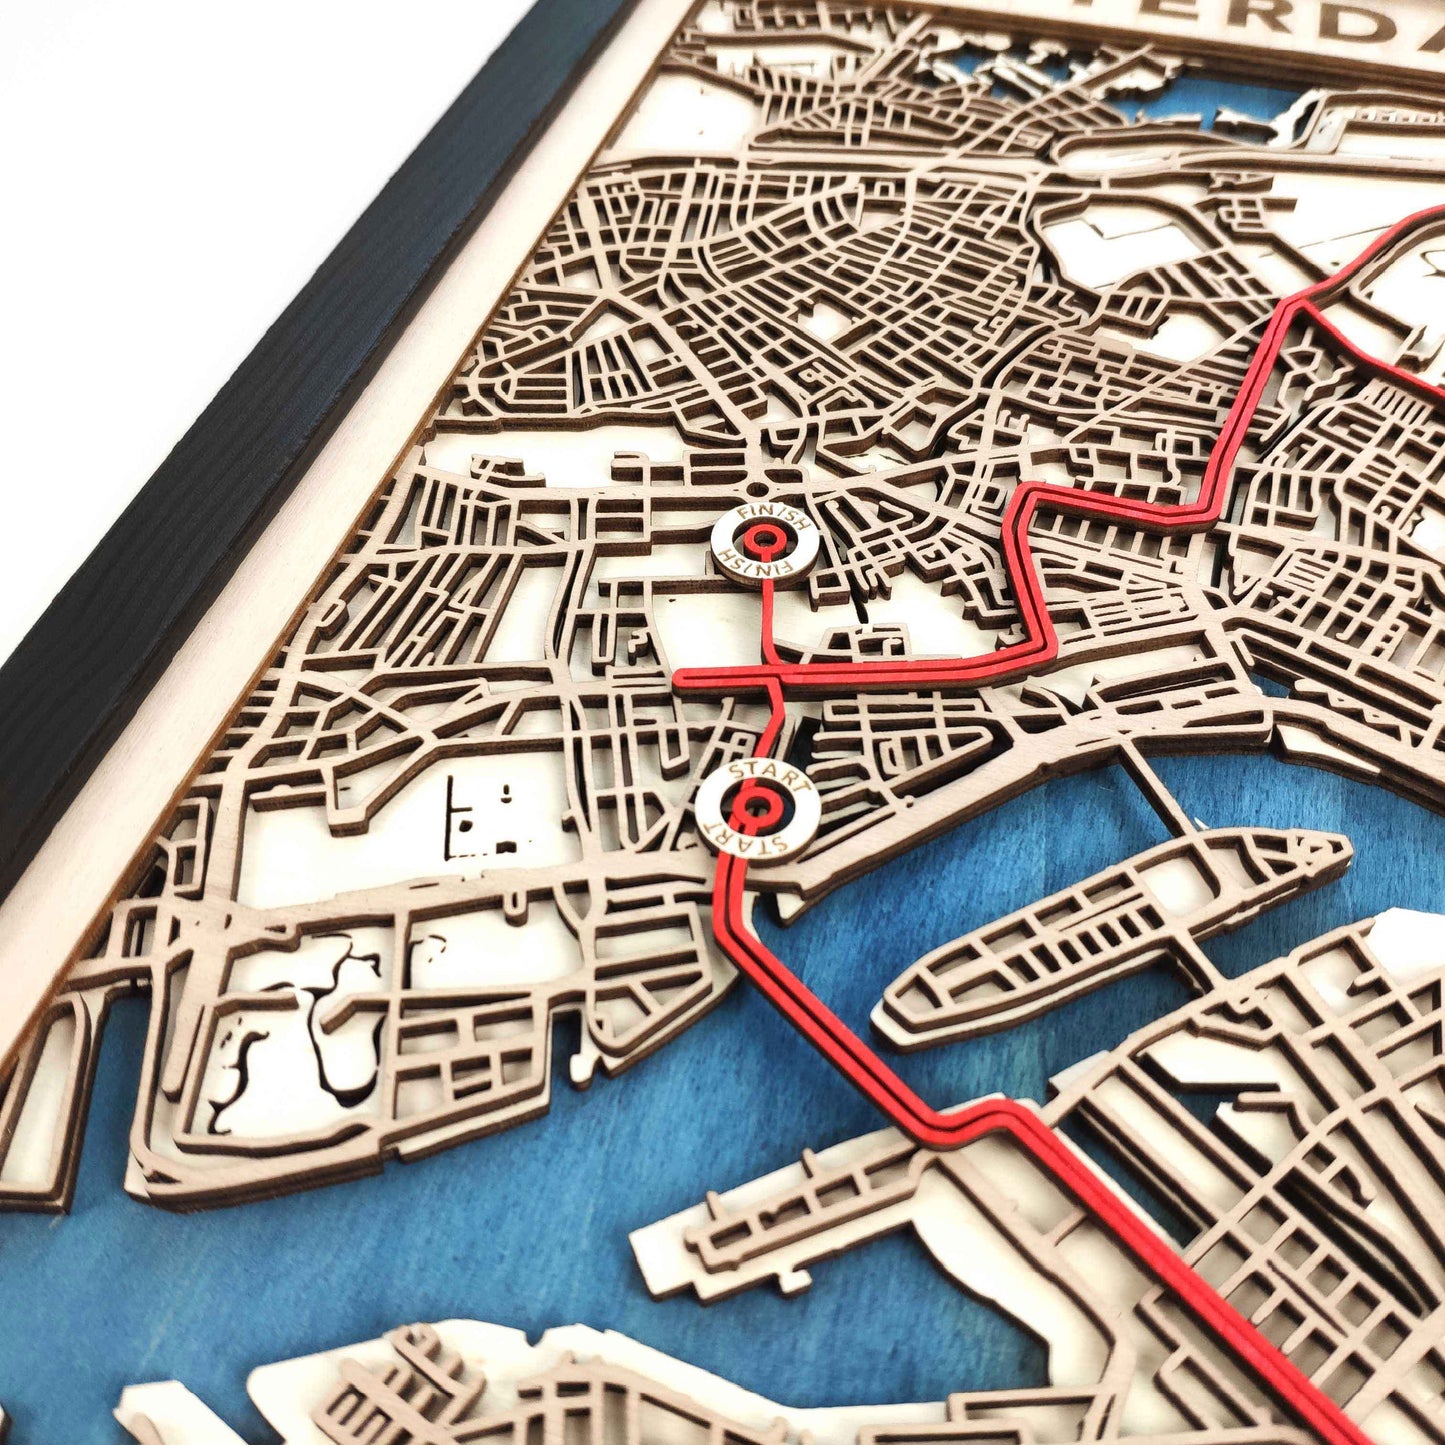 Rotterdam Marathon Wooden Map by CityWood - Custom Wood Map Art - Unique Laser Cut Engraved - Anniversary Gift